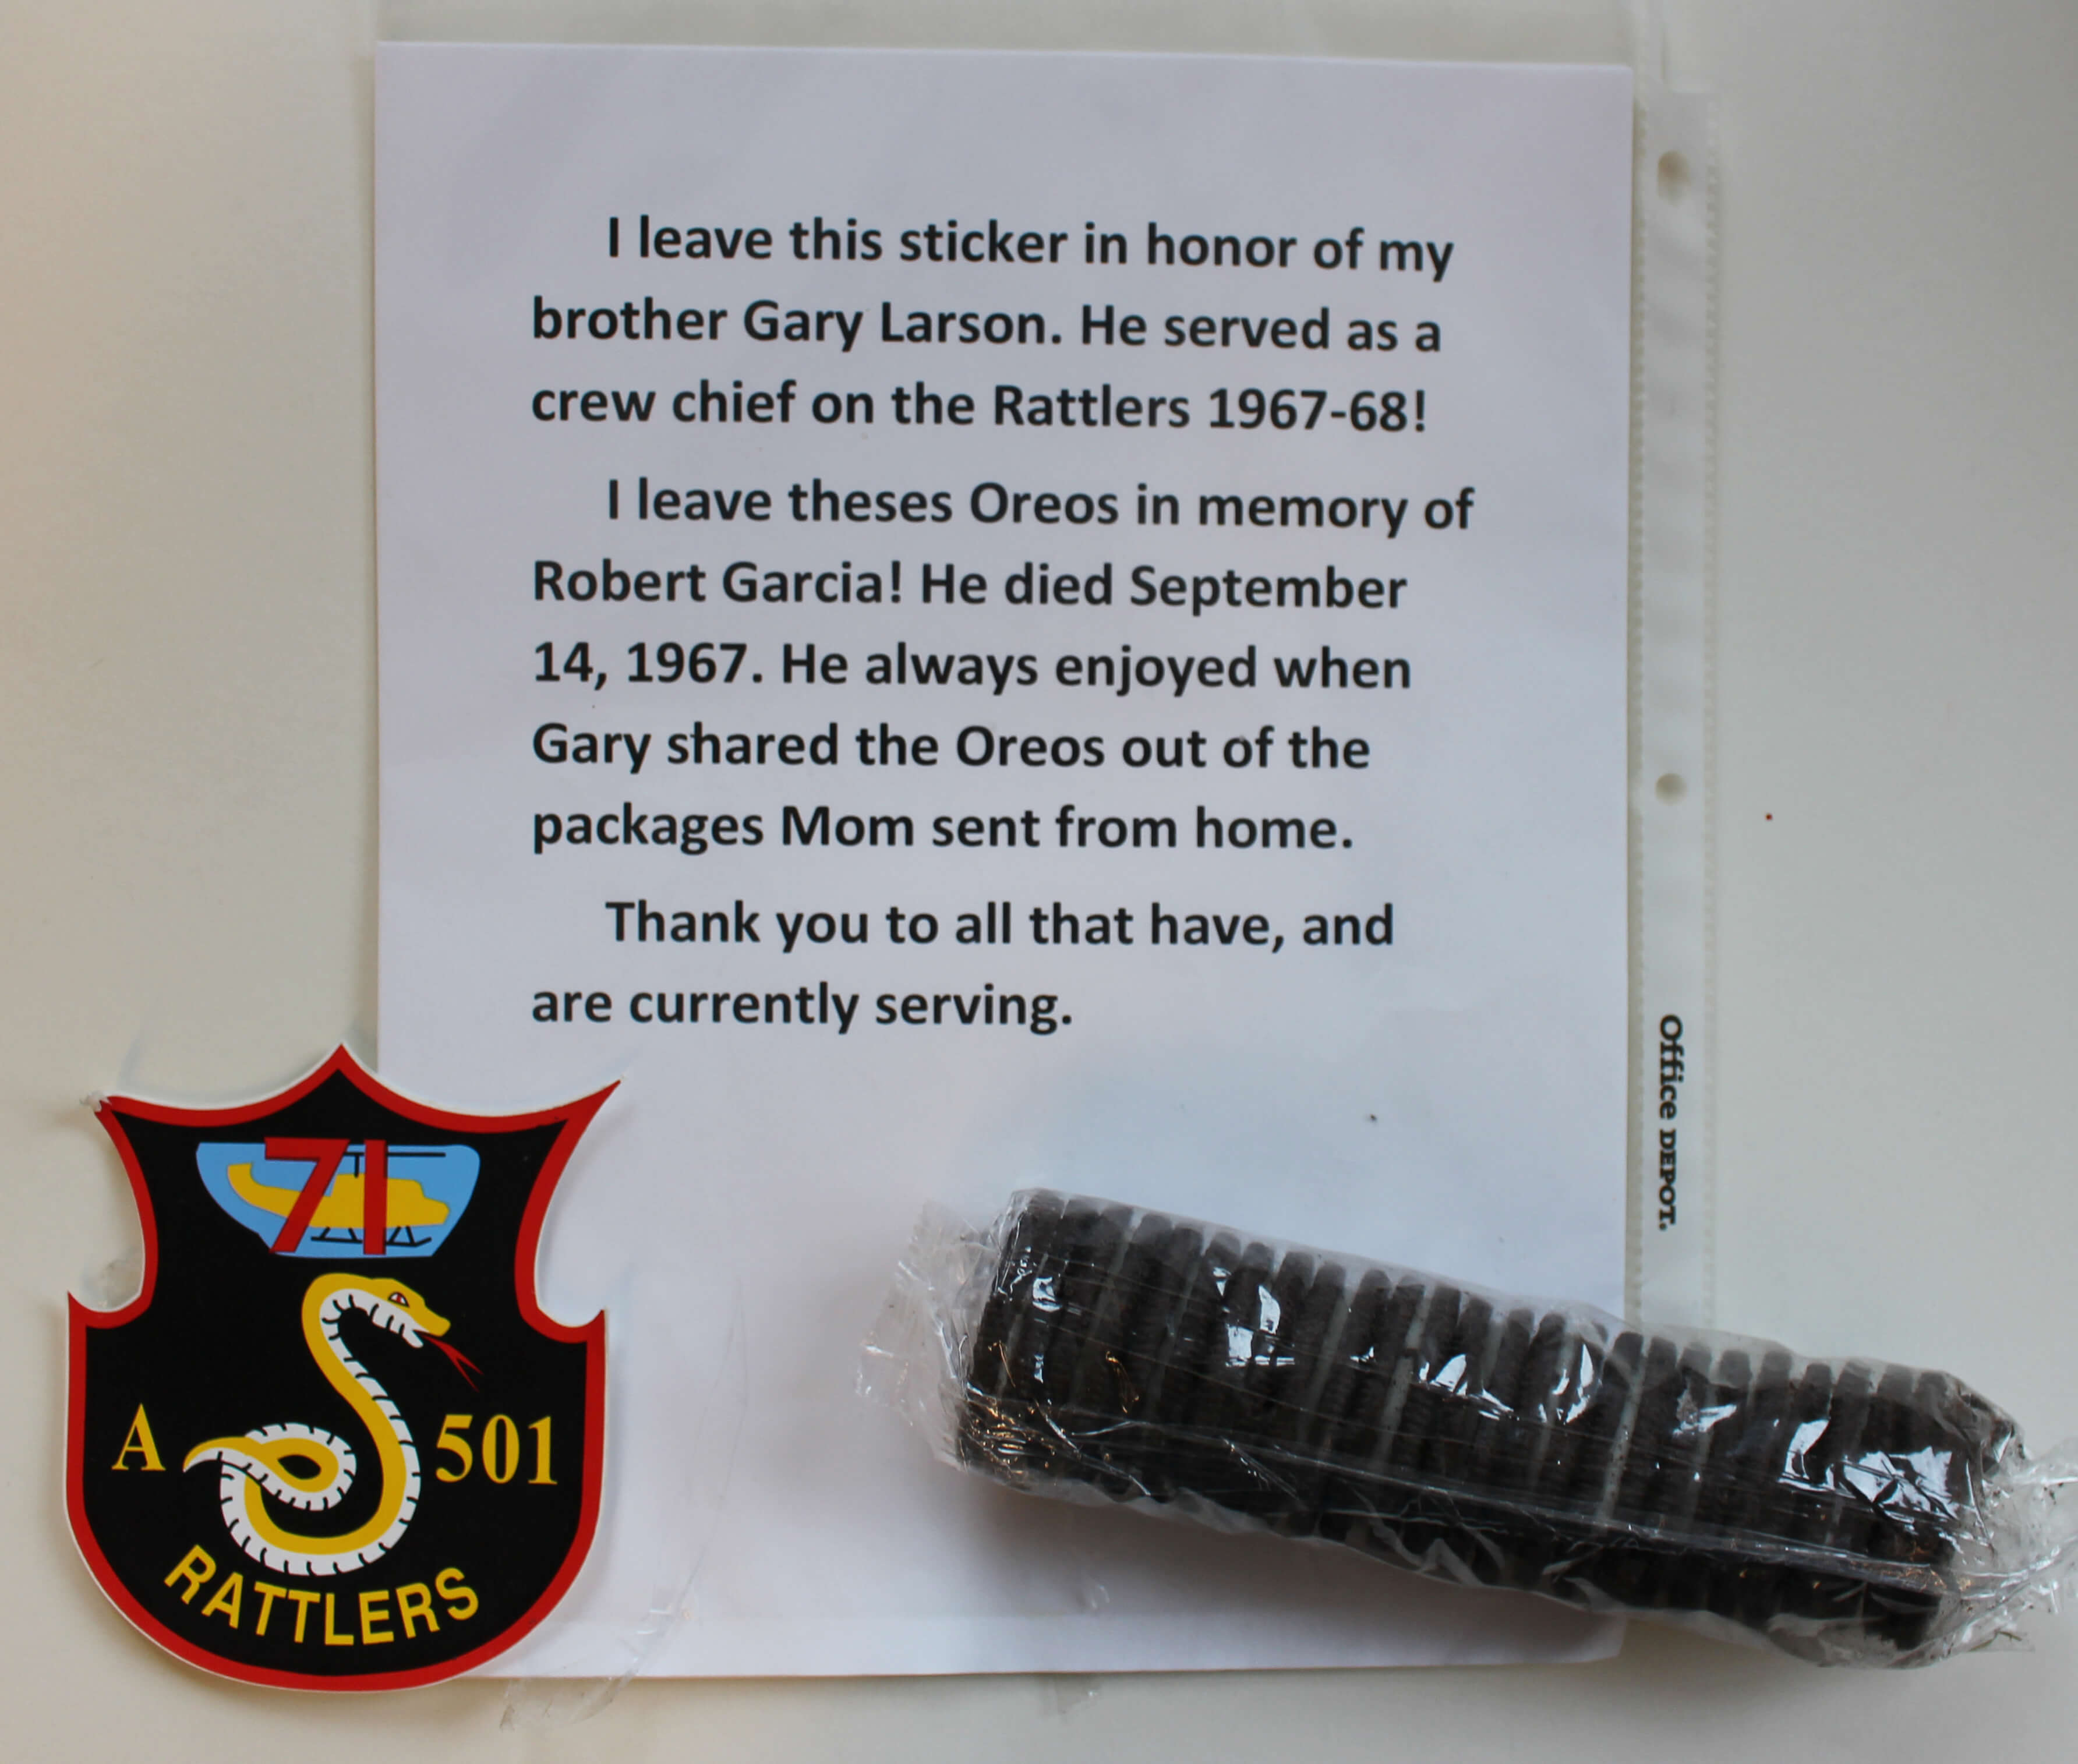 Letter, military sticker, and package of Oreo cookies